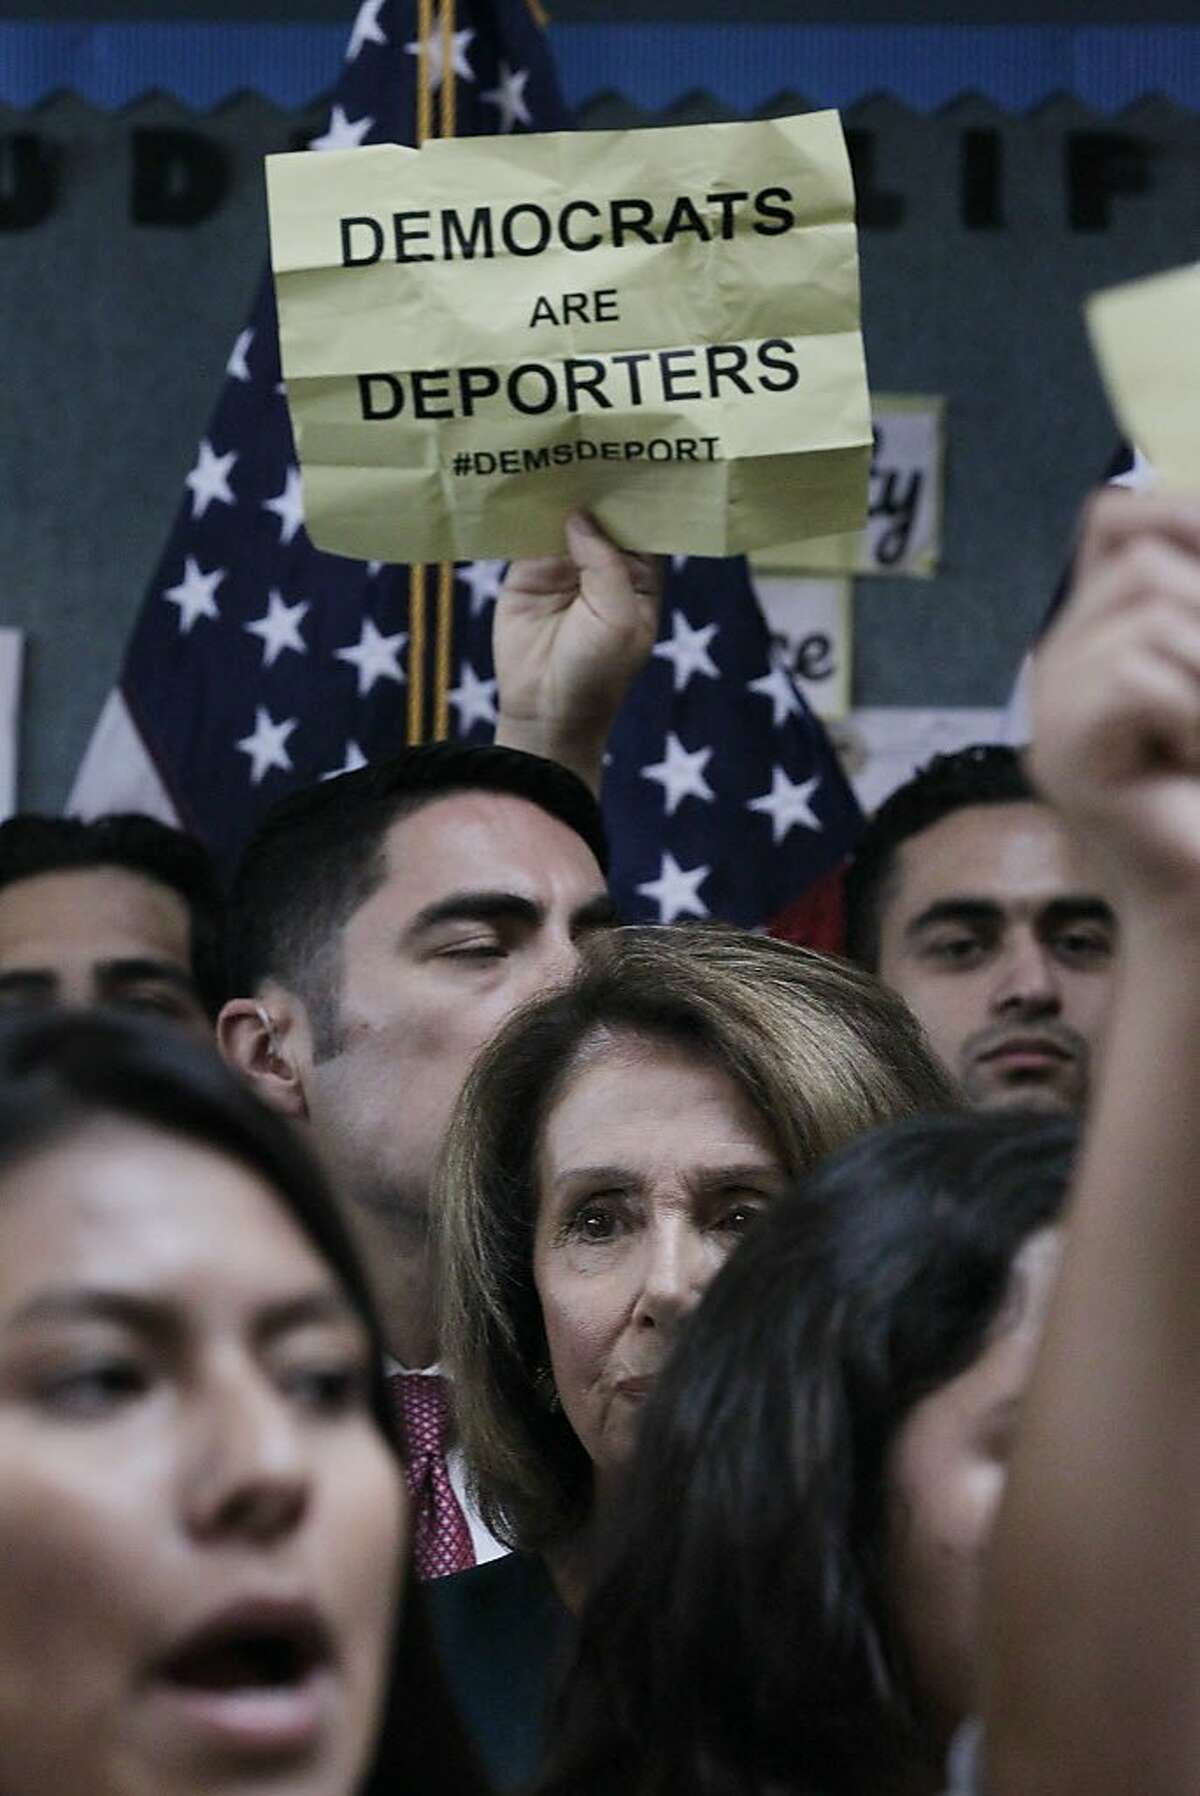 U.S. House Minority Leader Nancy Pelosi (center) watches as protesters demonstrate during a press conference on the DREAM ACT on Monday, September 18, 2017 in San Francisco, Calif.